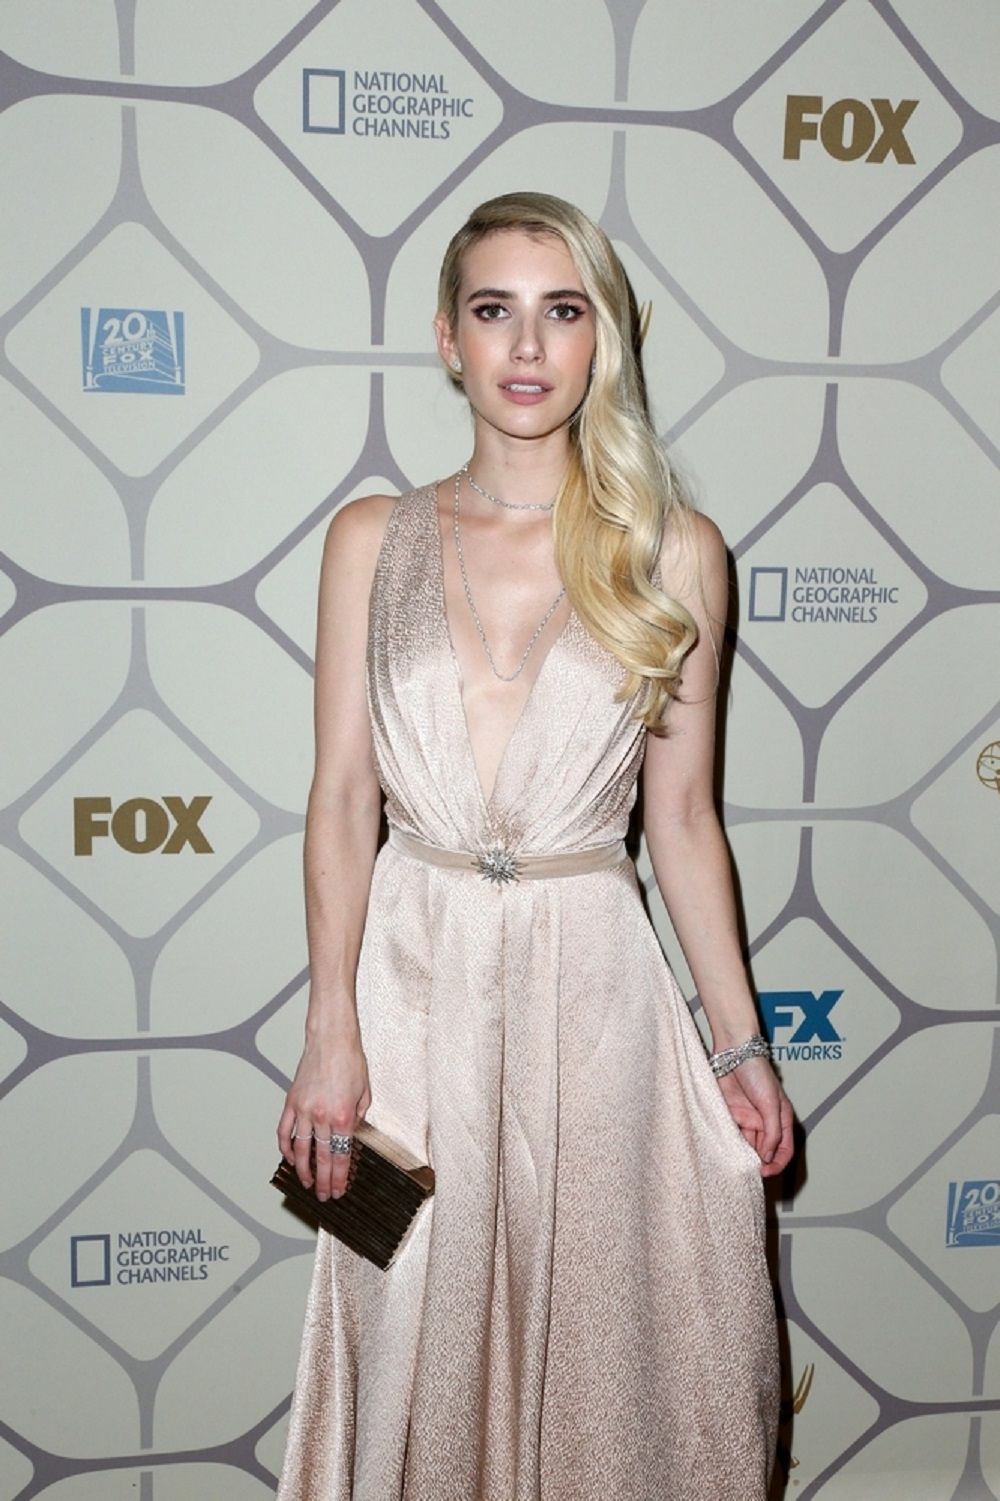 67th Annual Primetime Emmy Awards Fox After Party - Arrivals